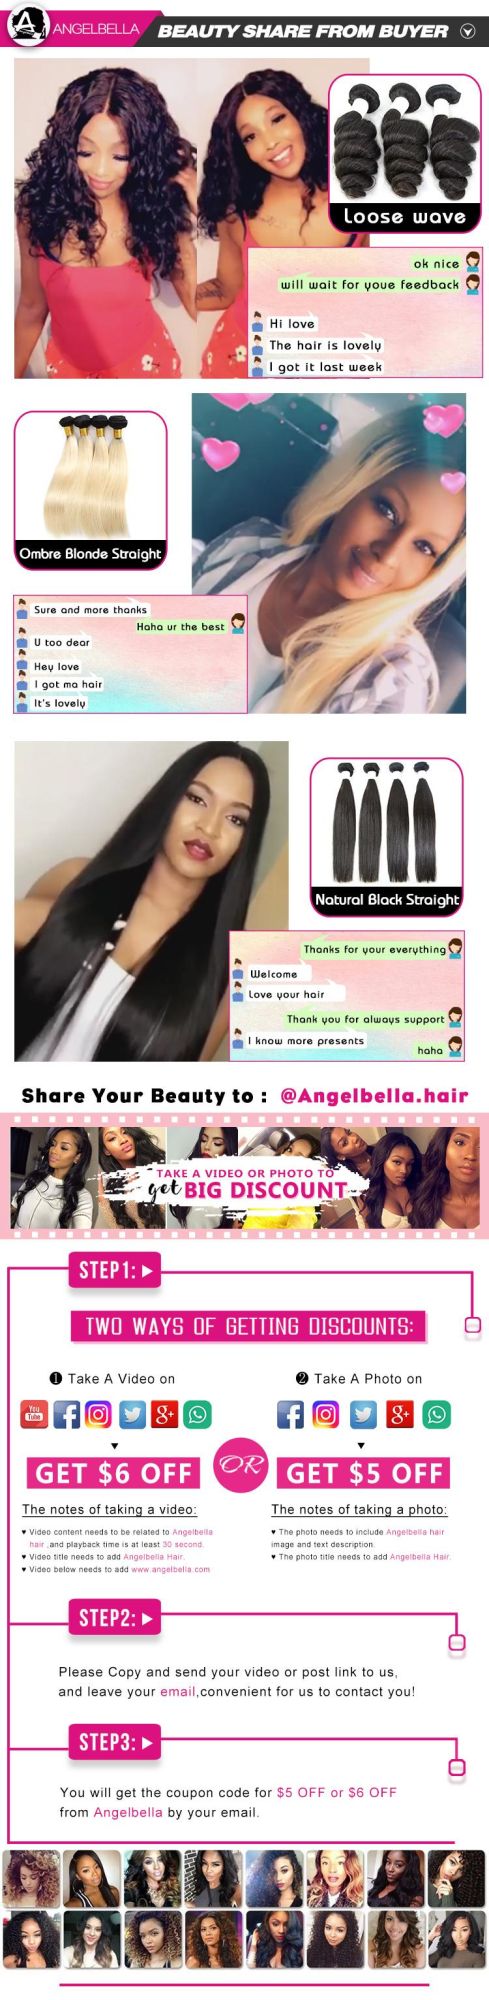 Angelbella Silky Straight Wigs Virgin Remy Human Hair Front Lace Wigs for Beauty Lady Stock